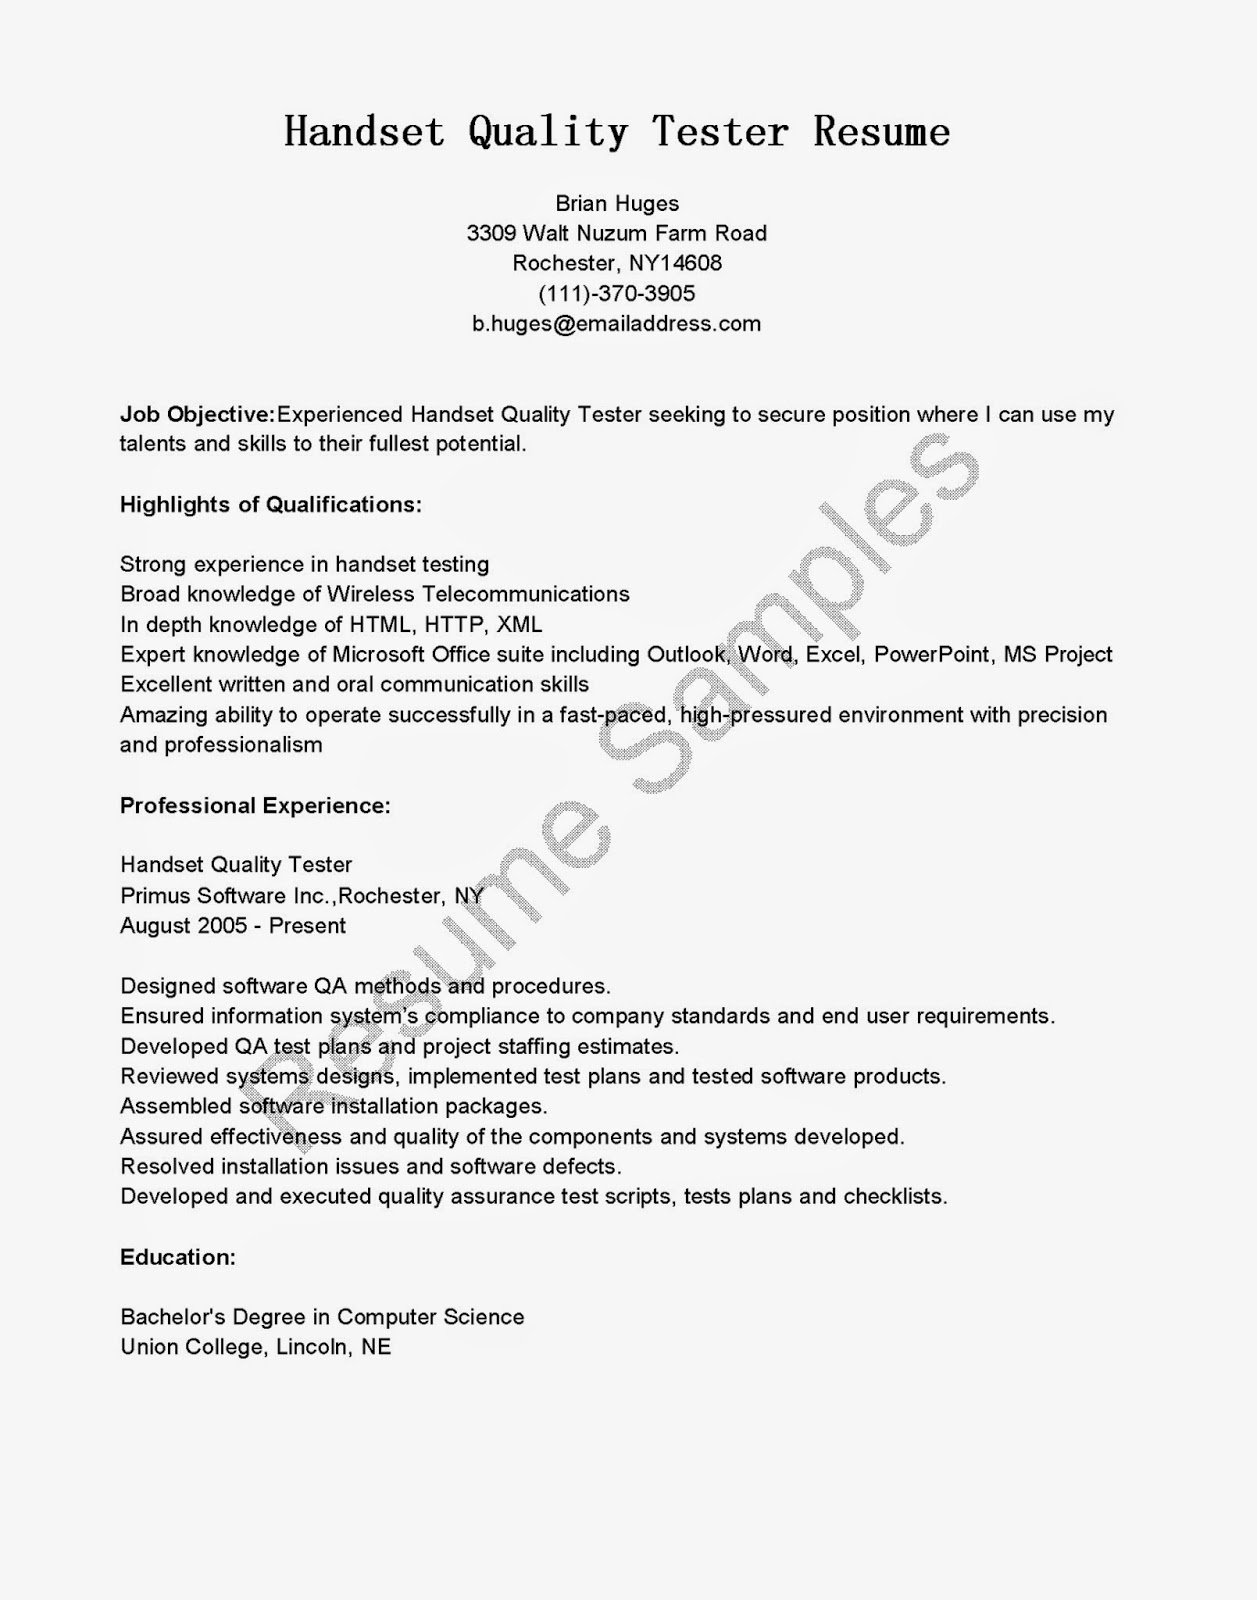 Software quality assurance analyst sample resume